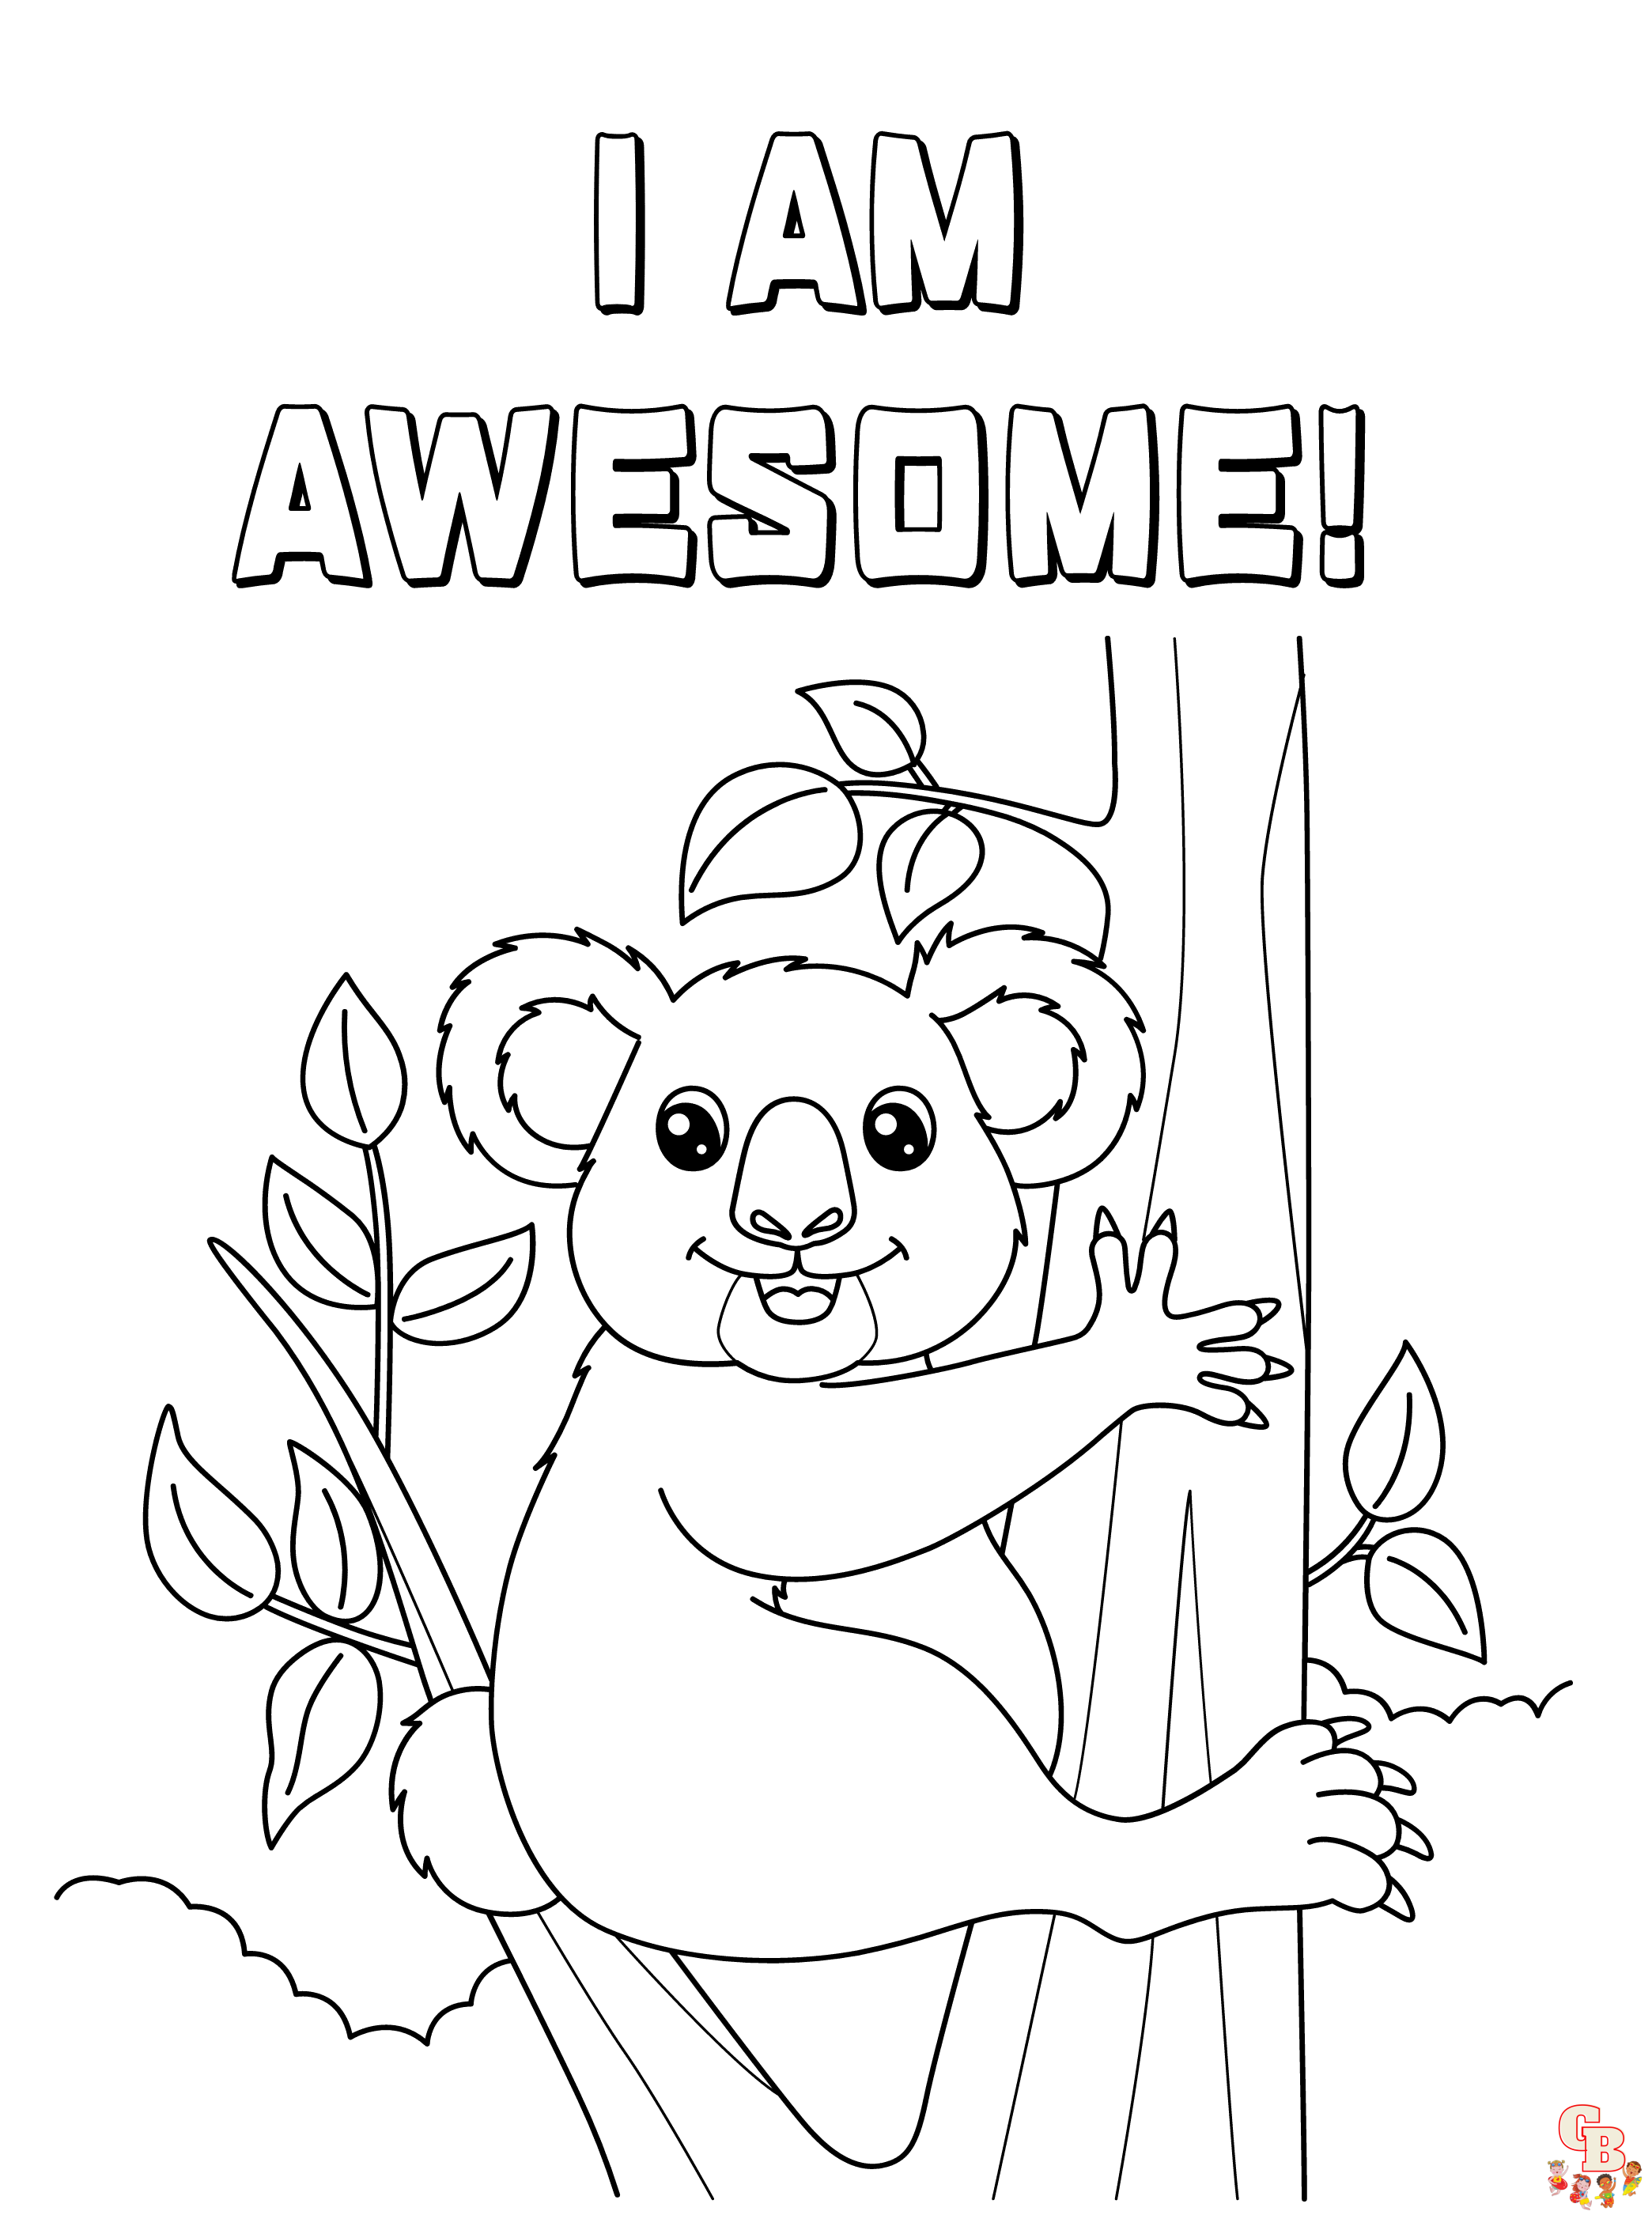 Positive Affirmation Coloring Pages